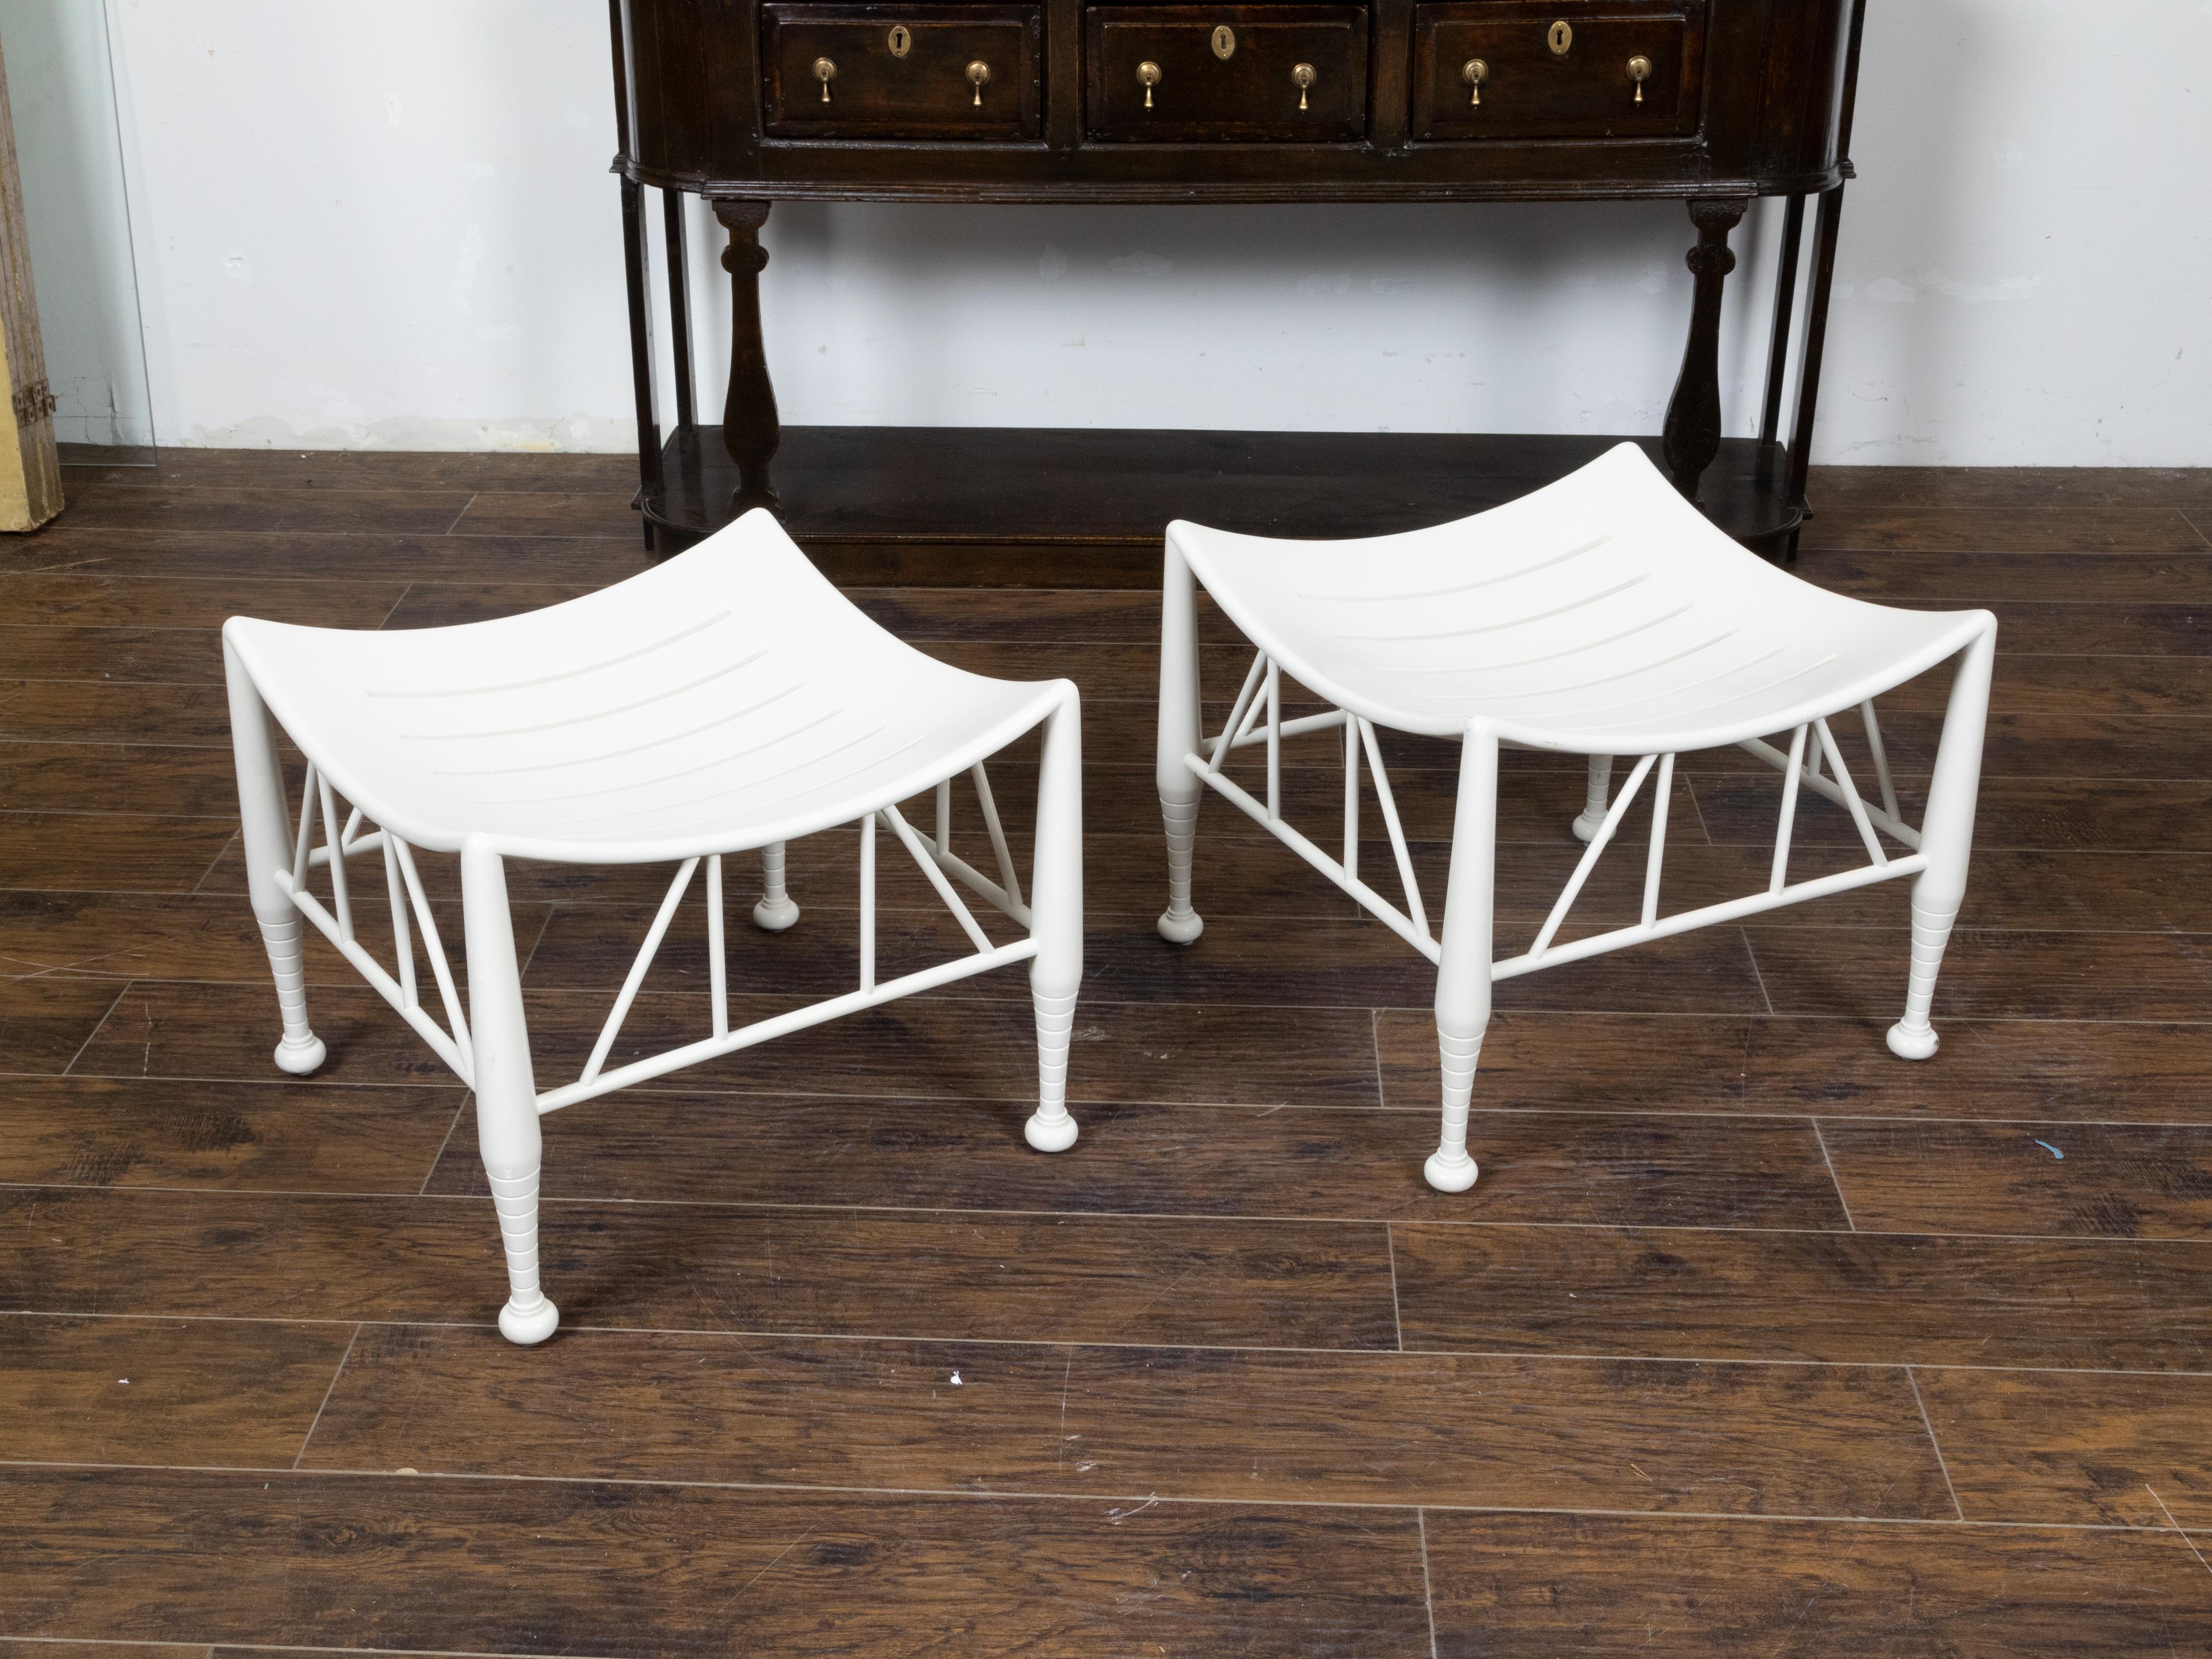 Pair of Vintage English Egyptian Revival White Thebes Stools with Curving Seats For Sale 1